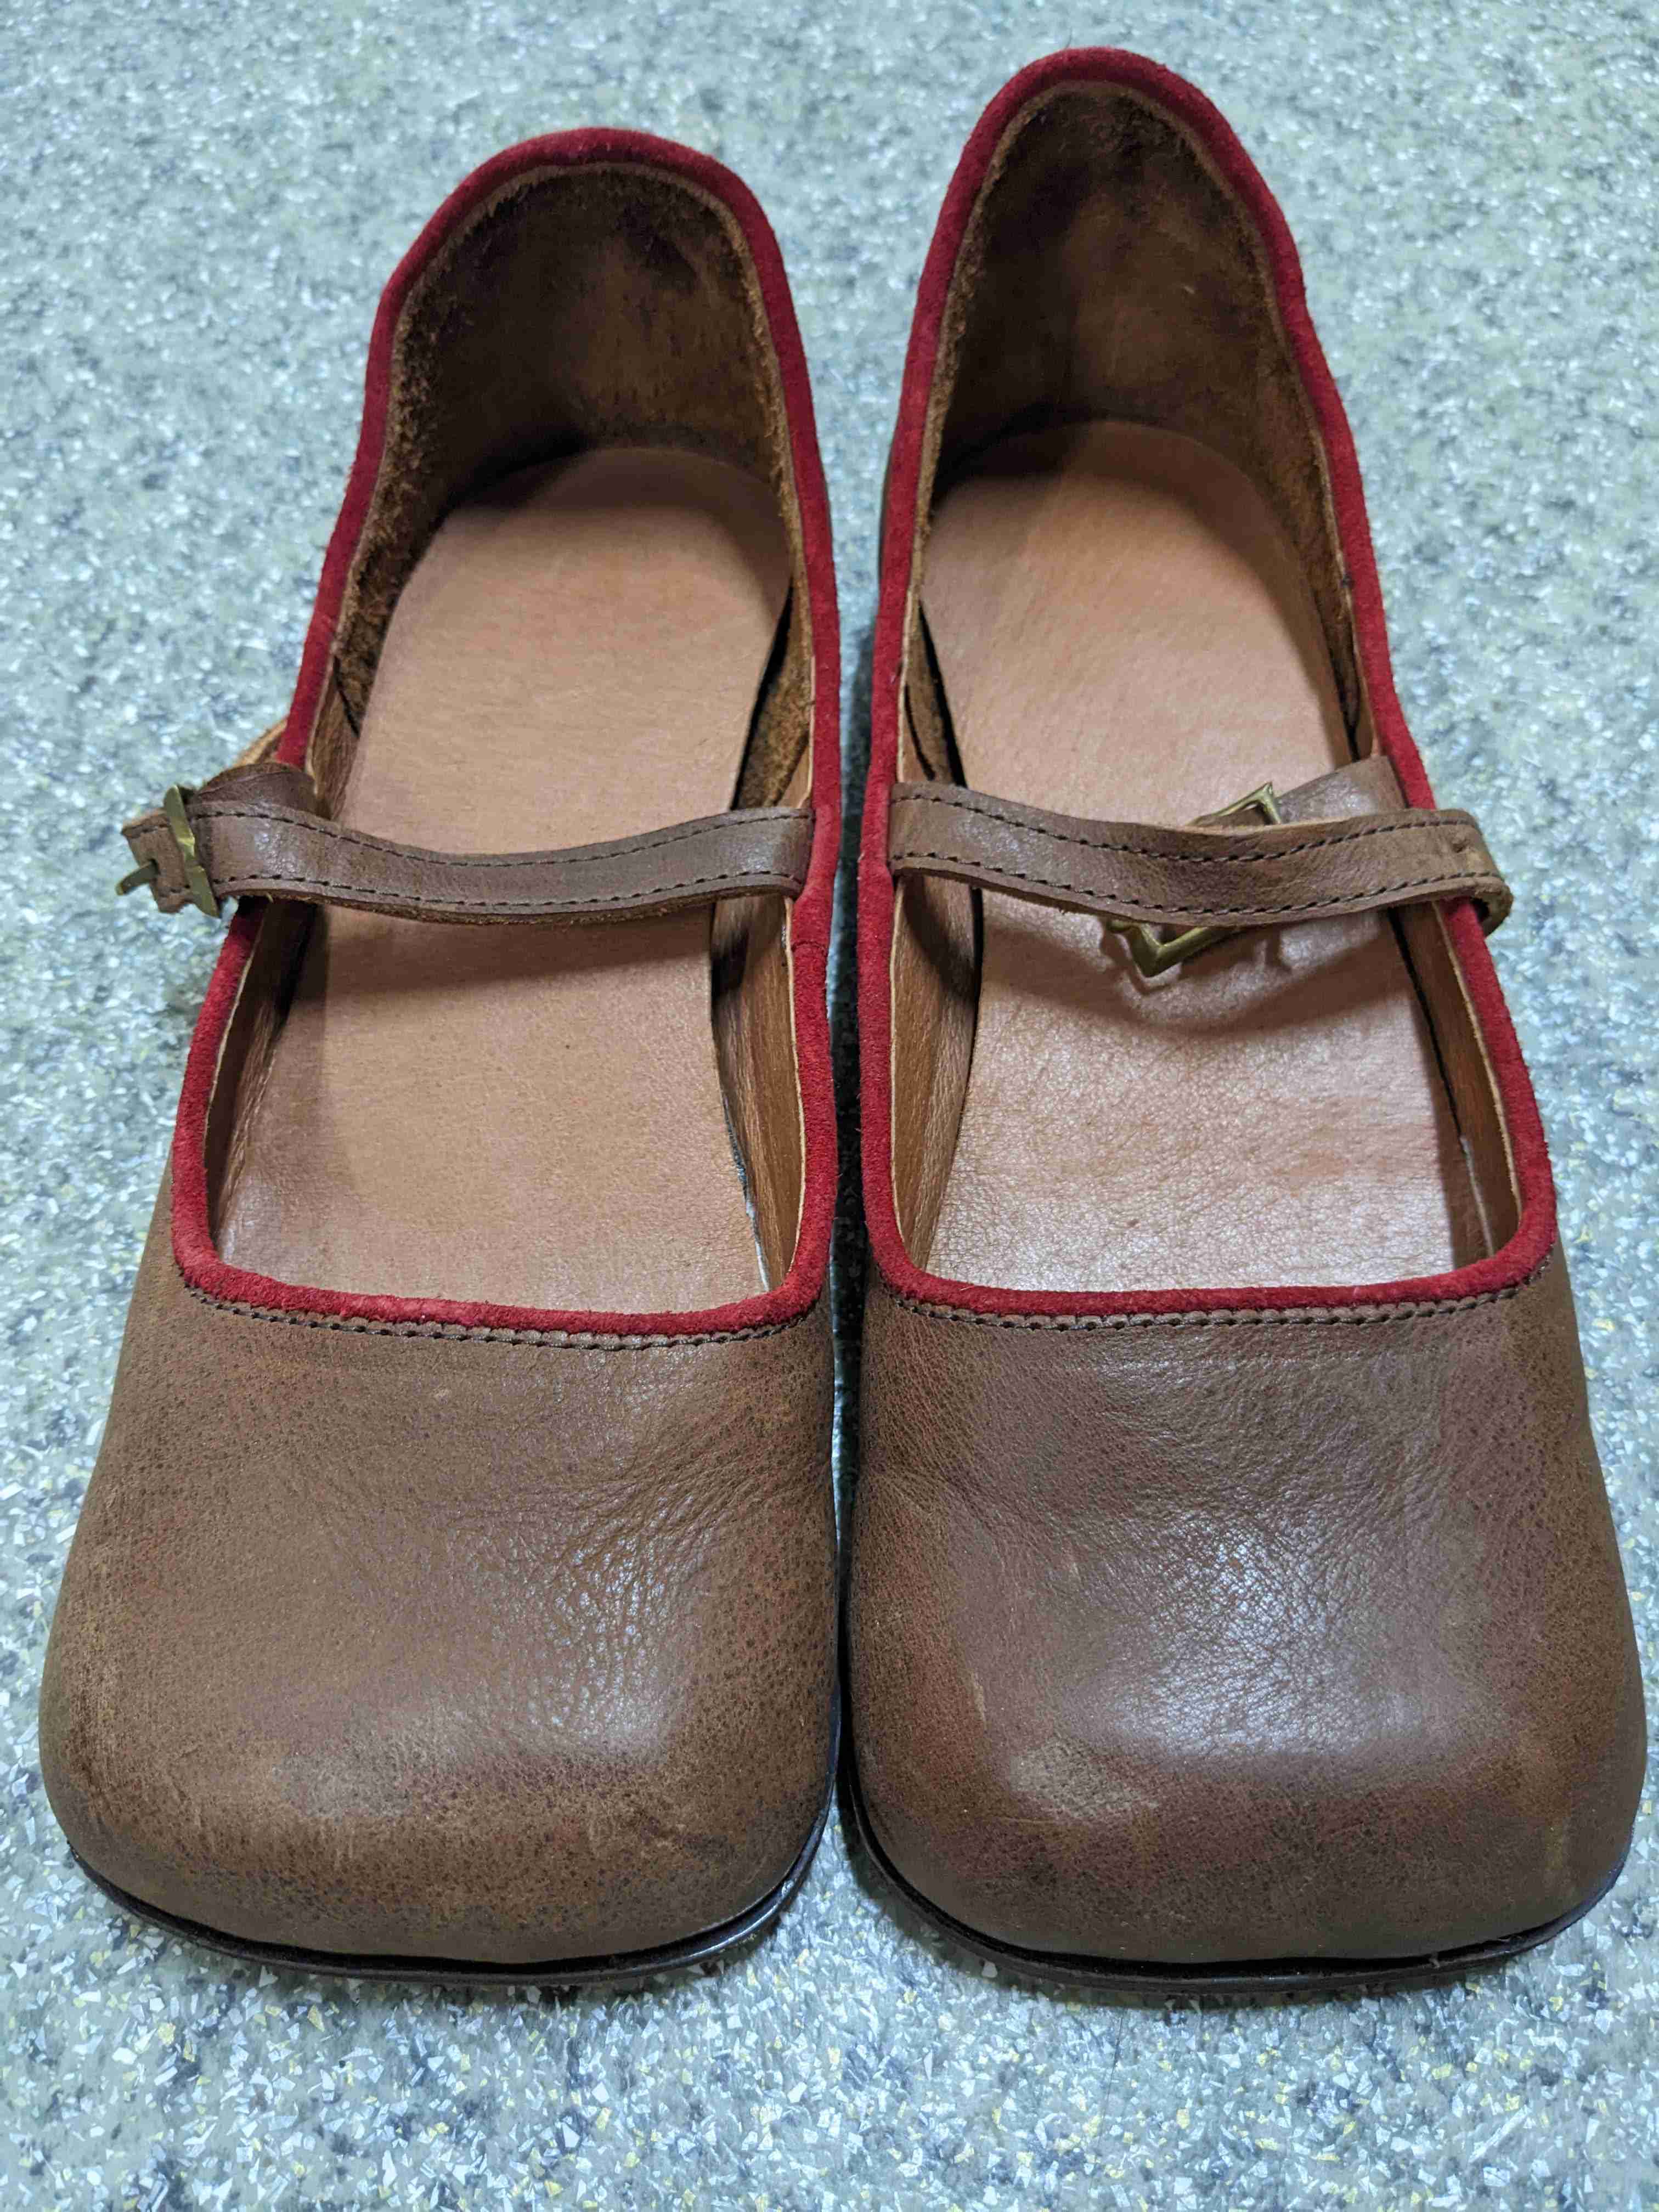 Sale German Rose Square Shoes with Bordering